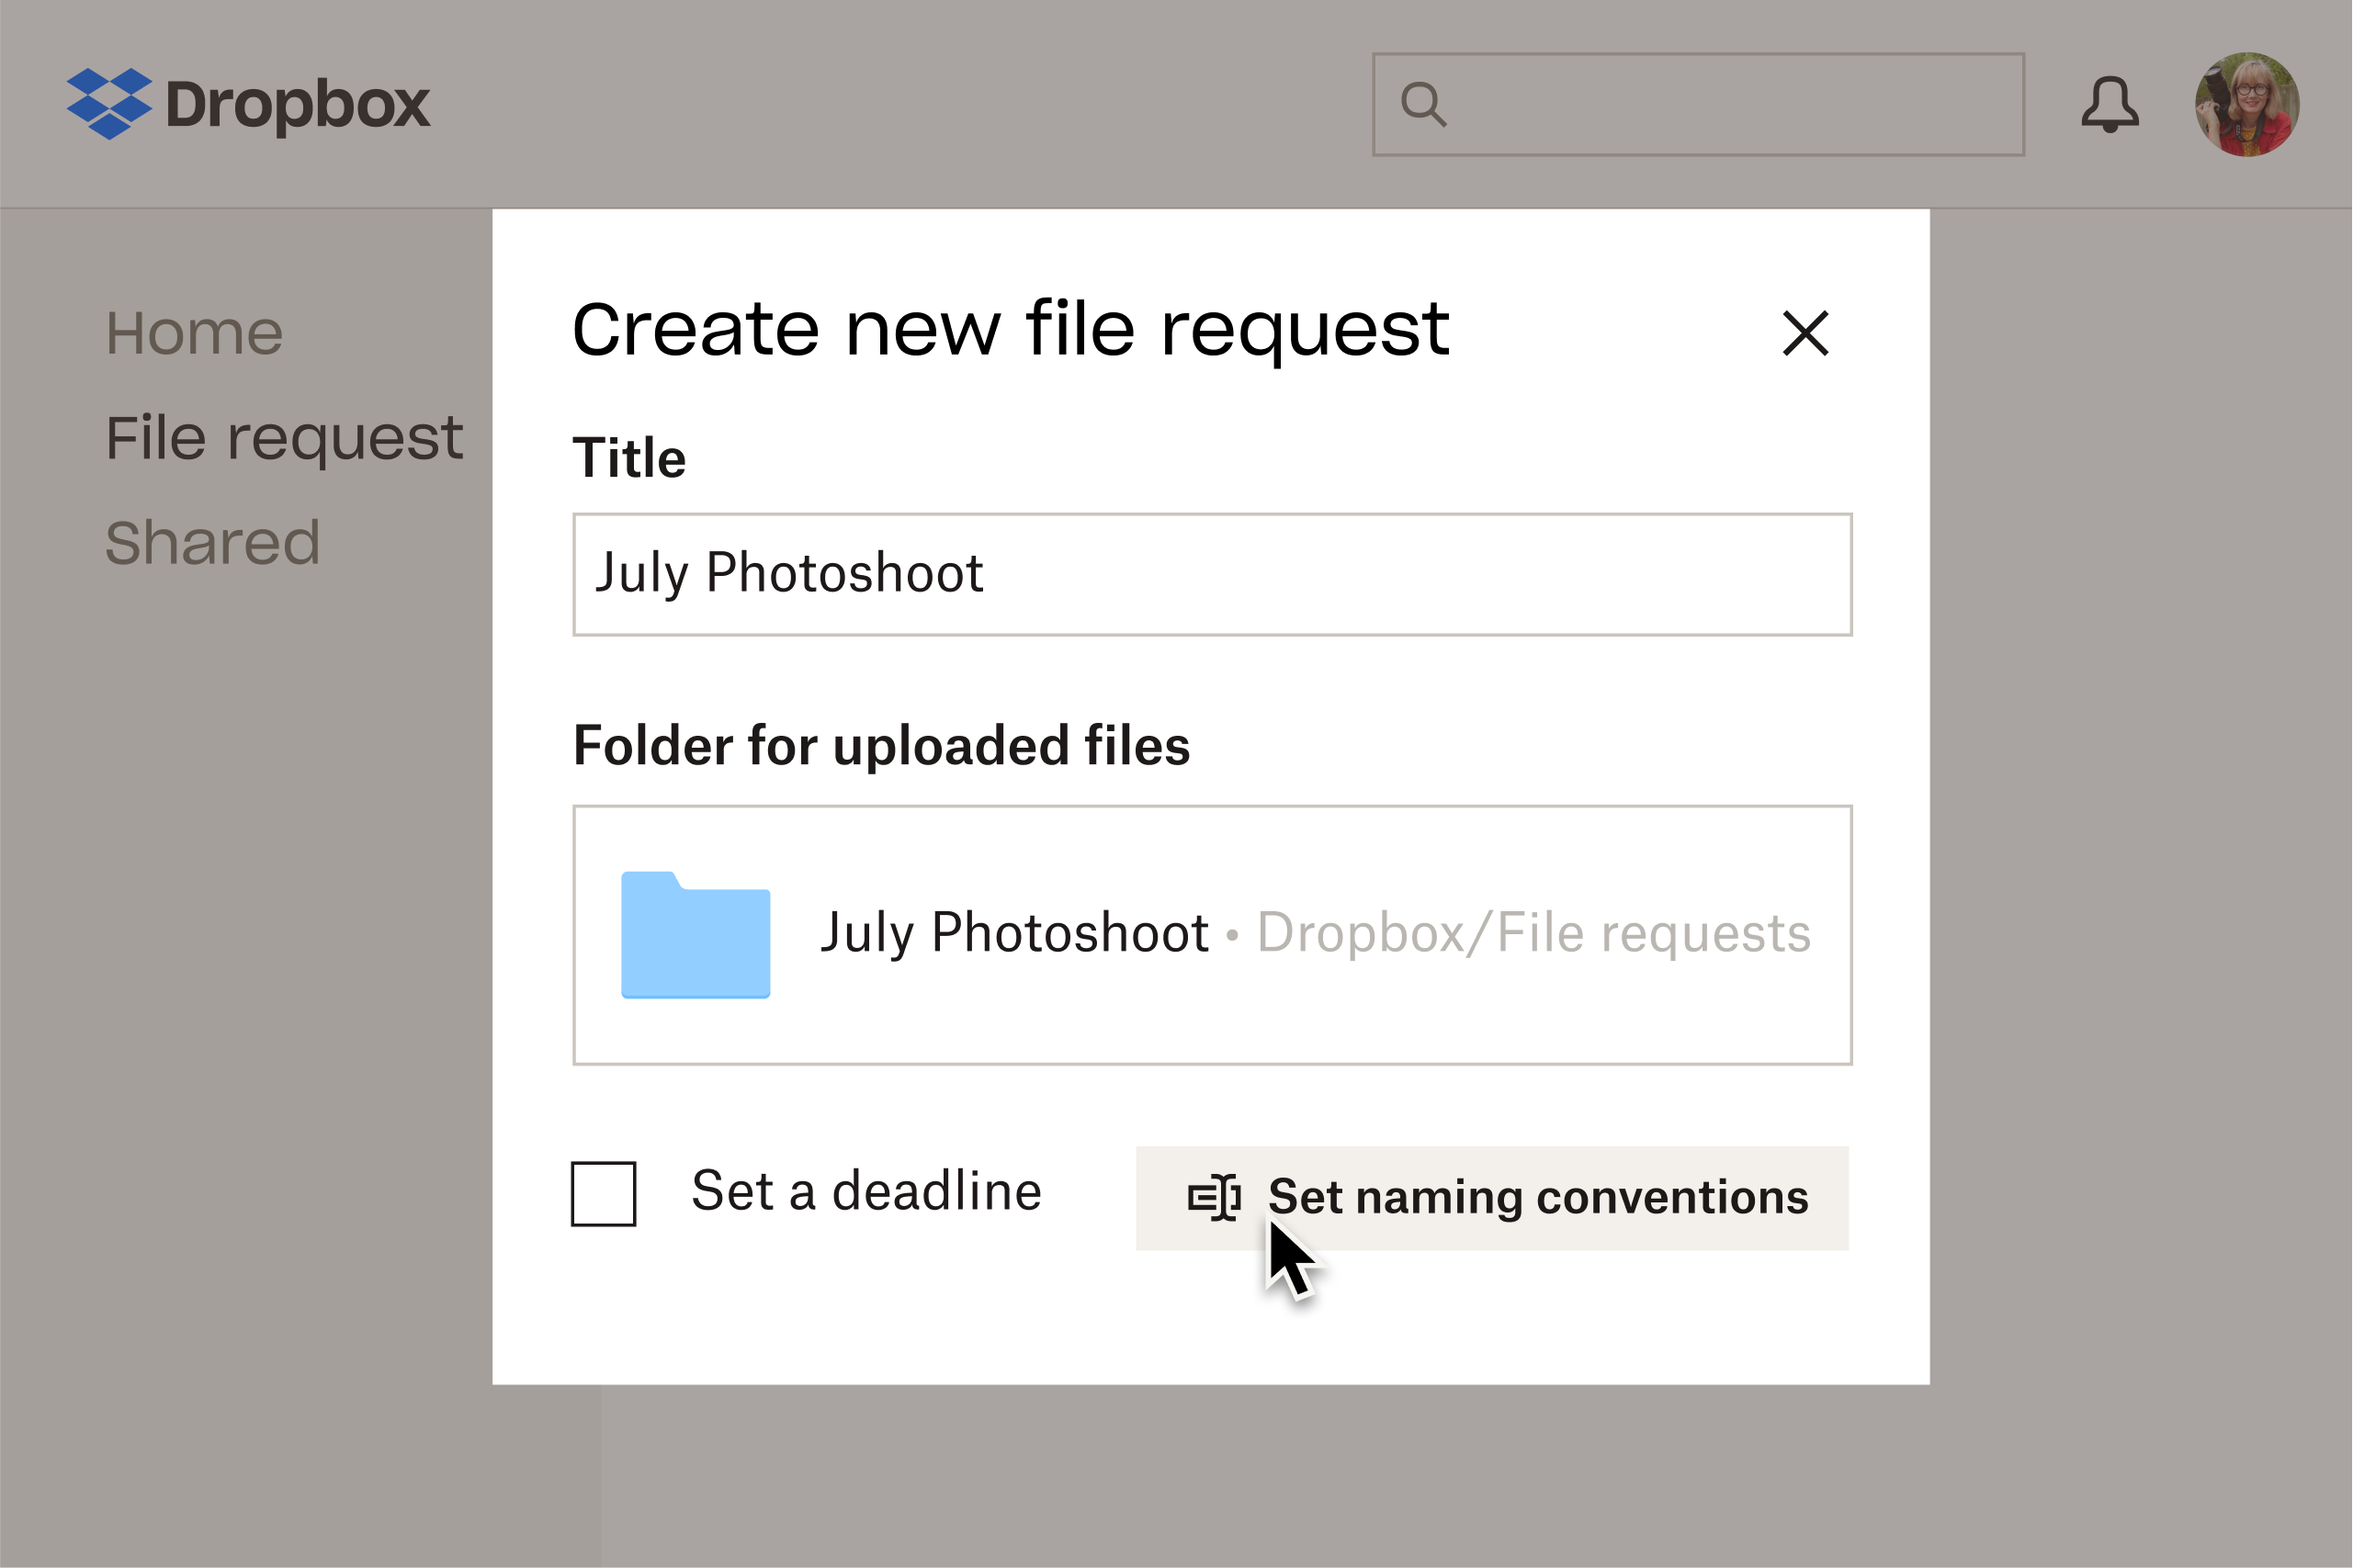 The Dropbox interface in which a user sets naming conventions for file requests